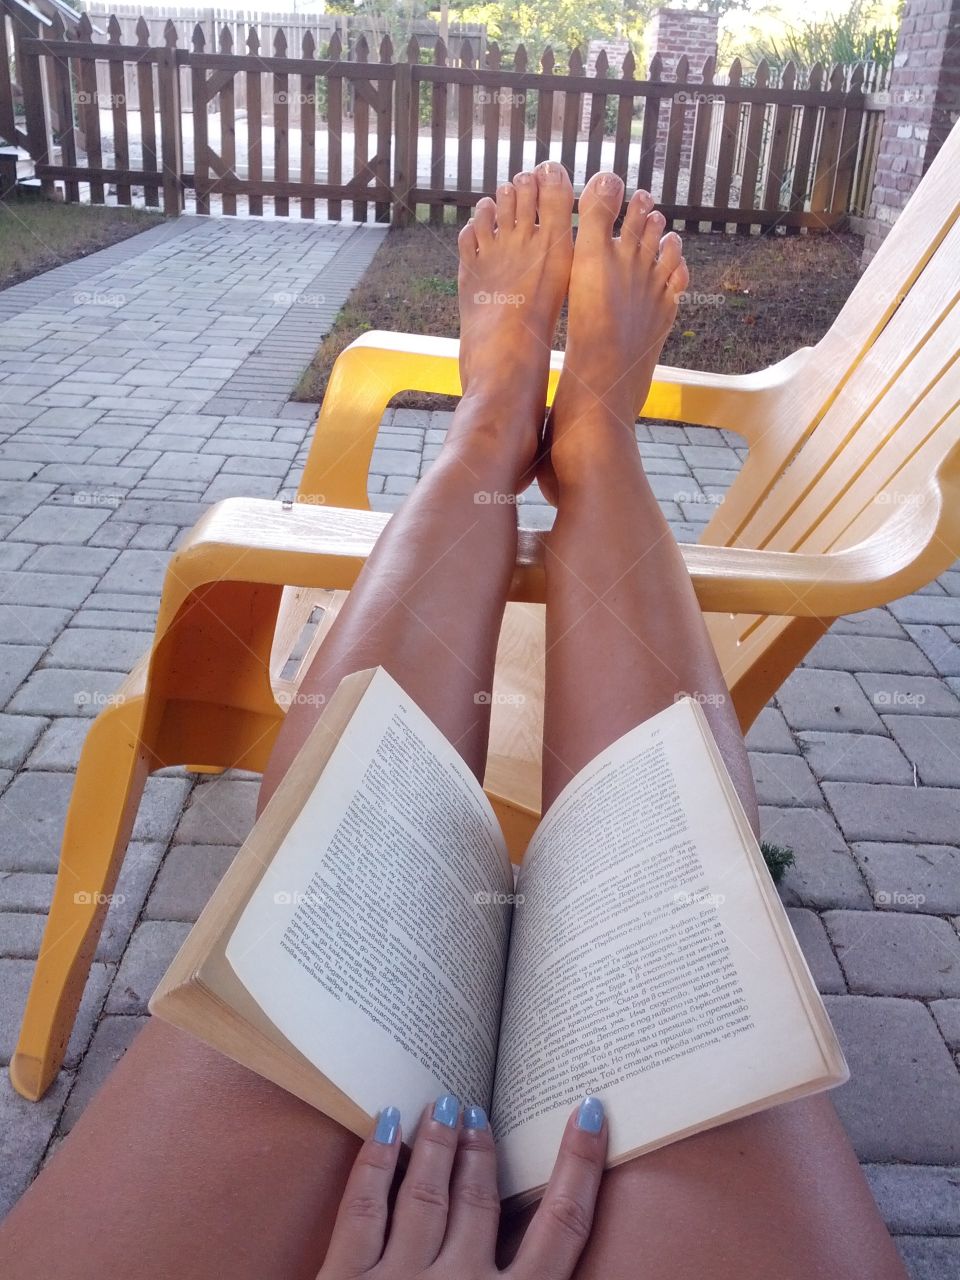 Relaxing, reading a book outside